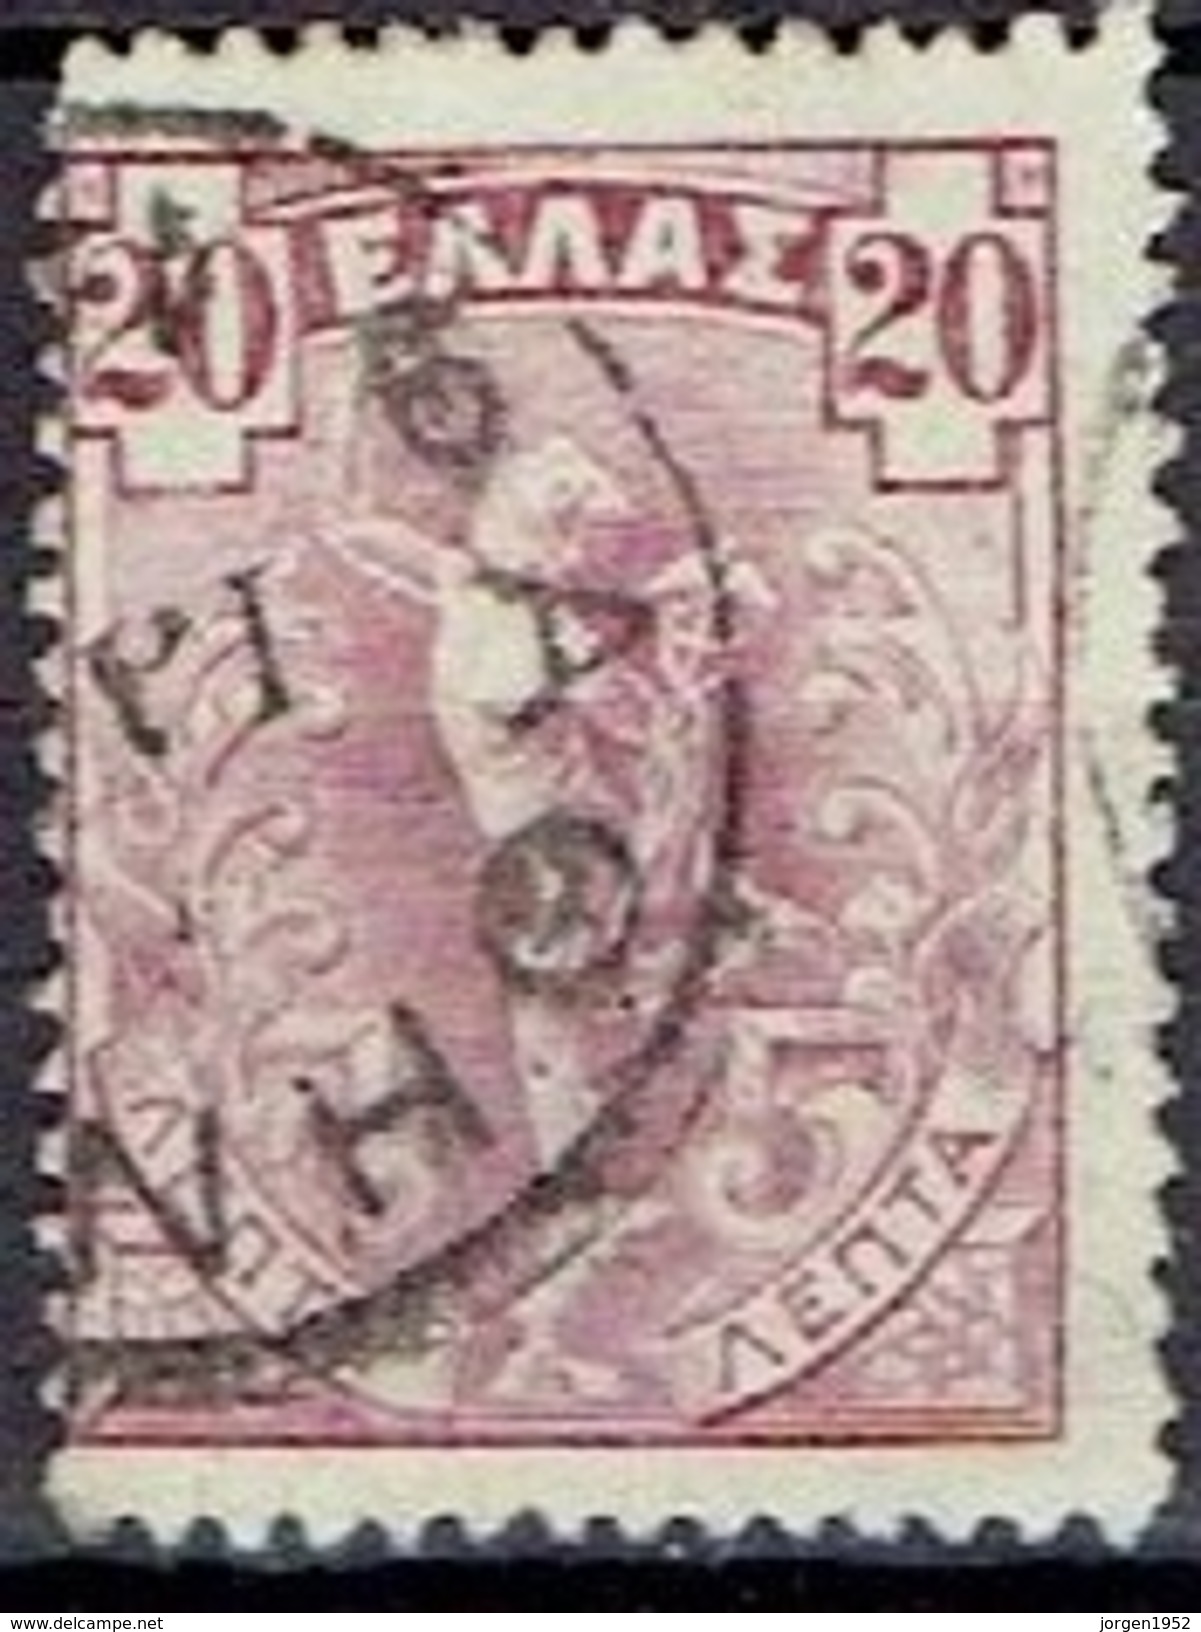 GREECE #   STAMPS FROM 1901  STAMPWORLD 109 - Used Stamps